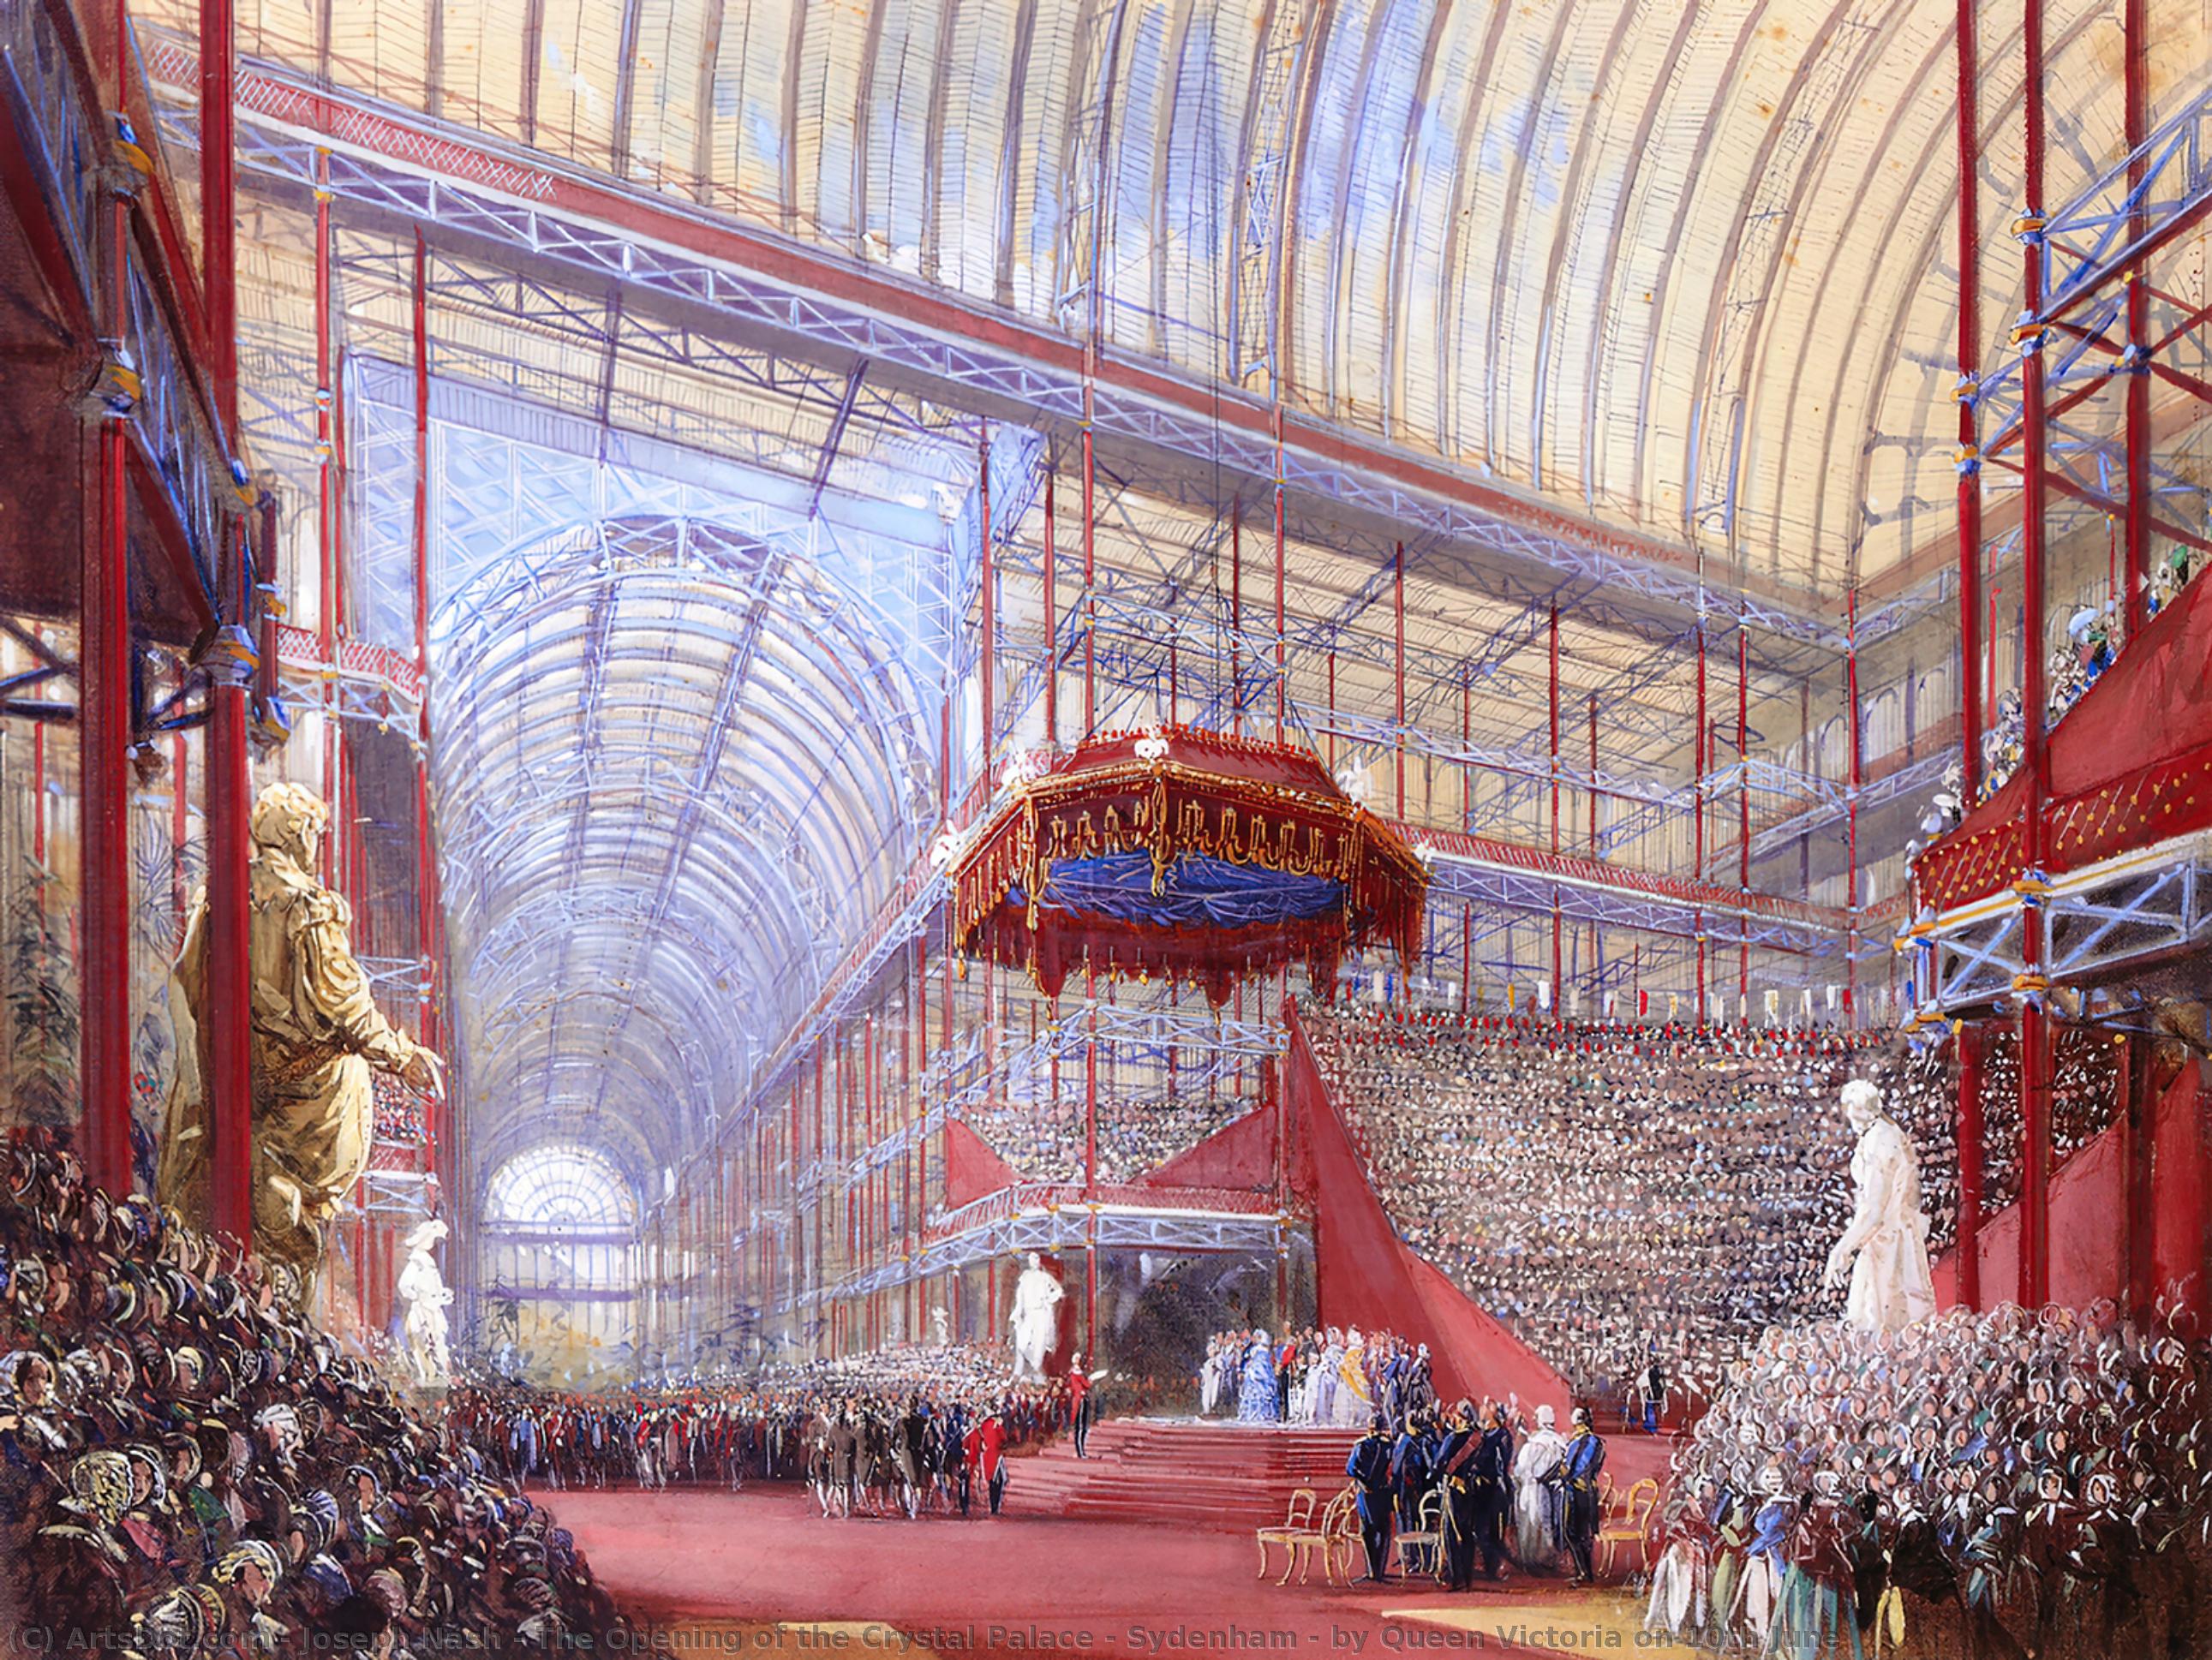 Wikioo.org - สารานุกรมวิจิตรศิลป์ - จิตรกรรม Joseph Nash - The Opening of the Crystal Palace - Sydenham - by Queen Victoria on 10th June